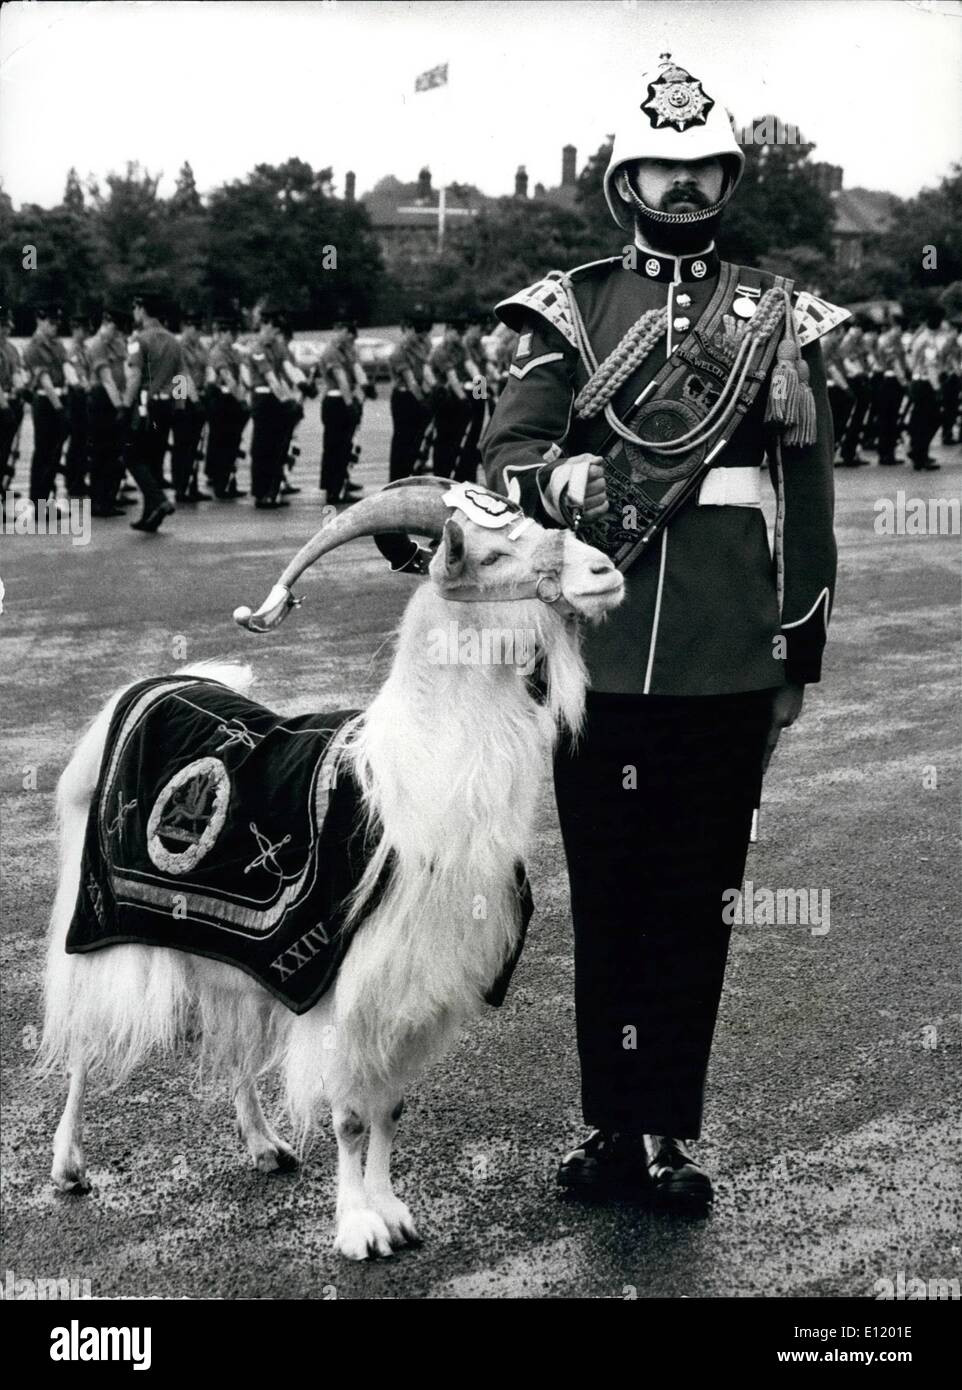 Jul. 07, 1981 - Rehearsal by the Royal regiment of Wales for the Royal Wedding: Taffy, the white Kaehmir goat regimental mascot Stock Photo